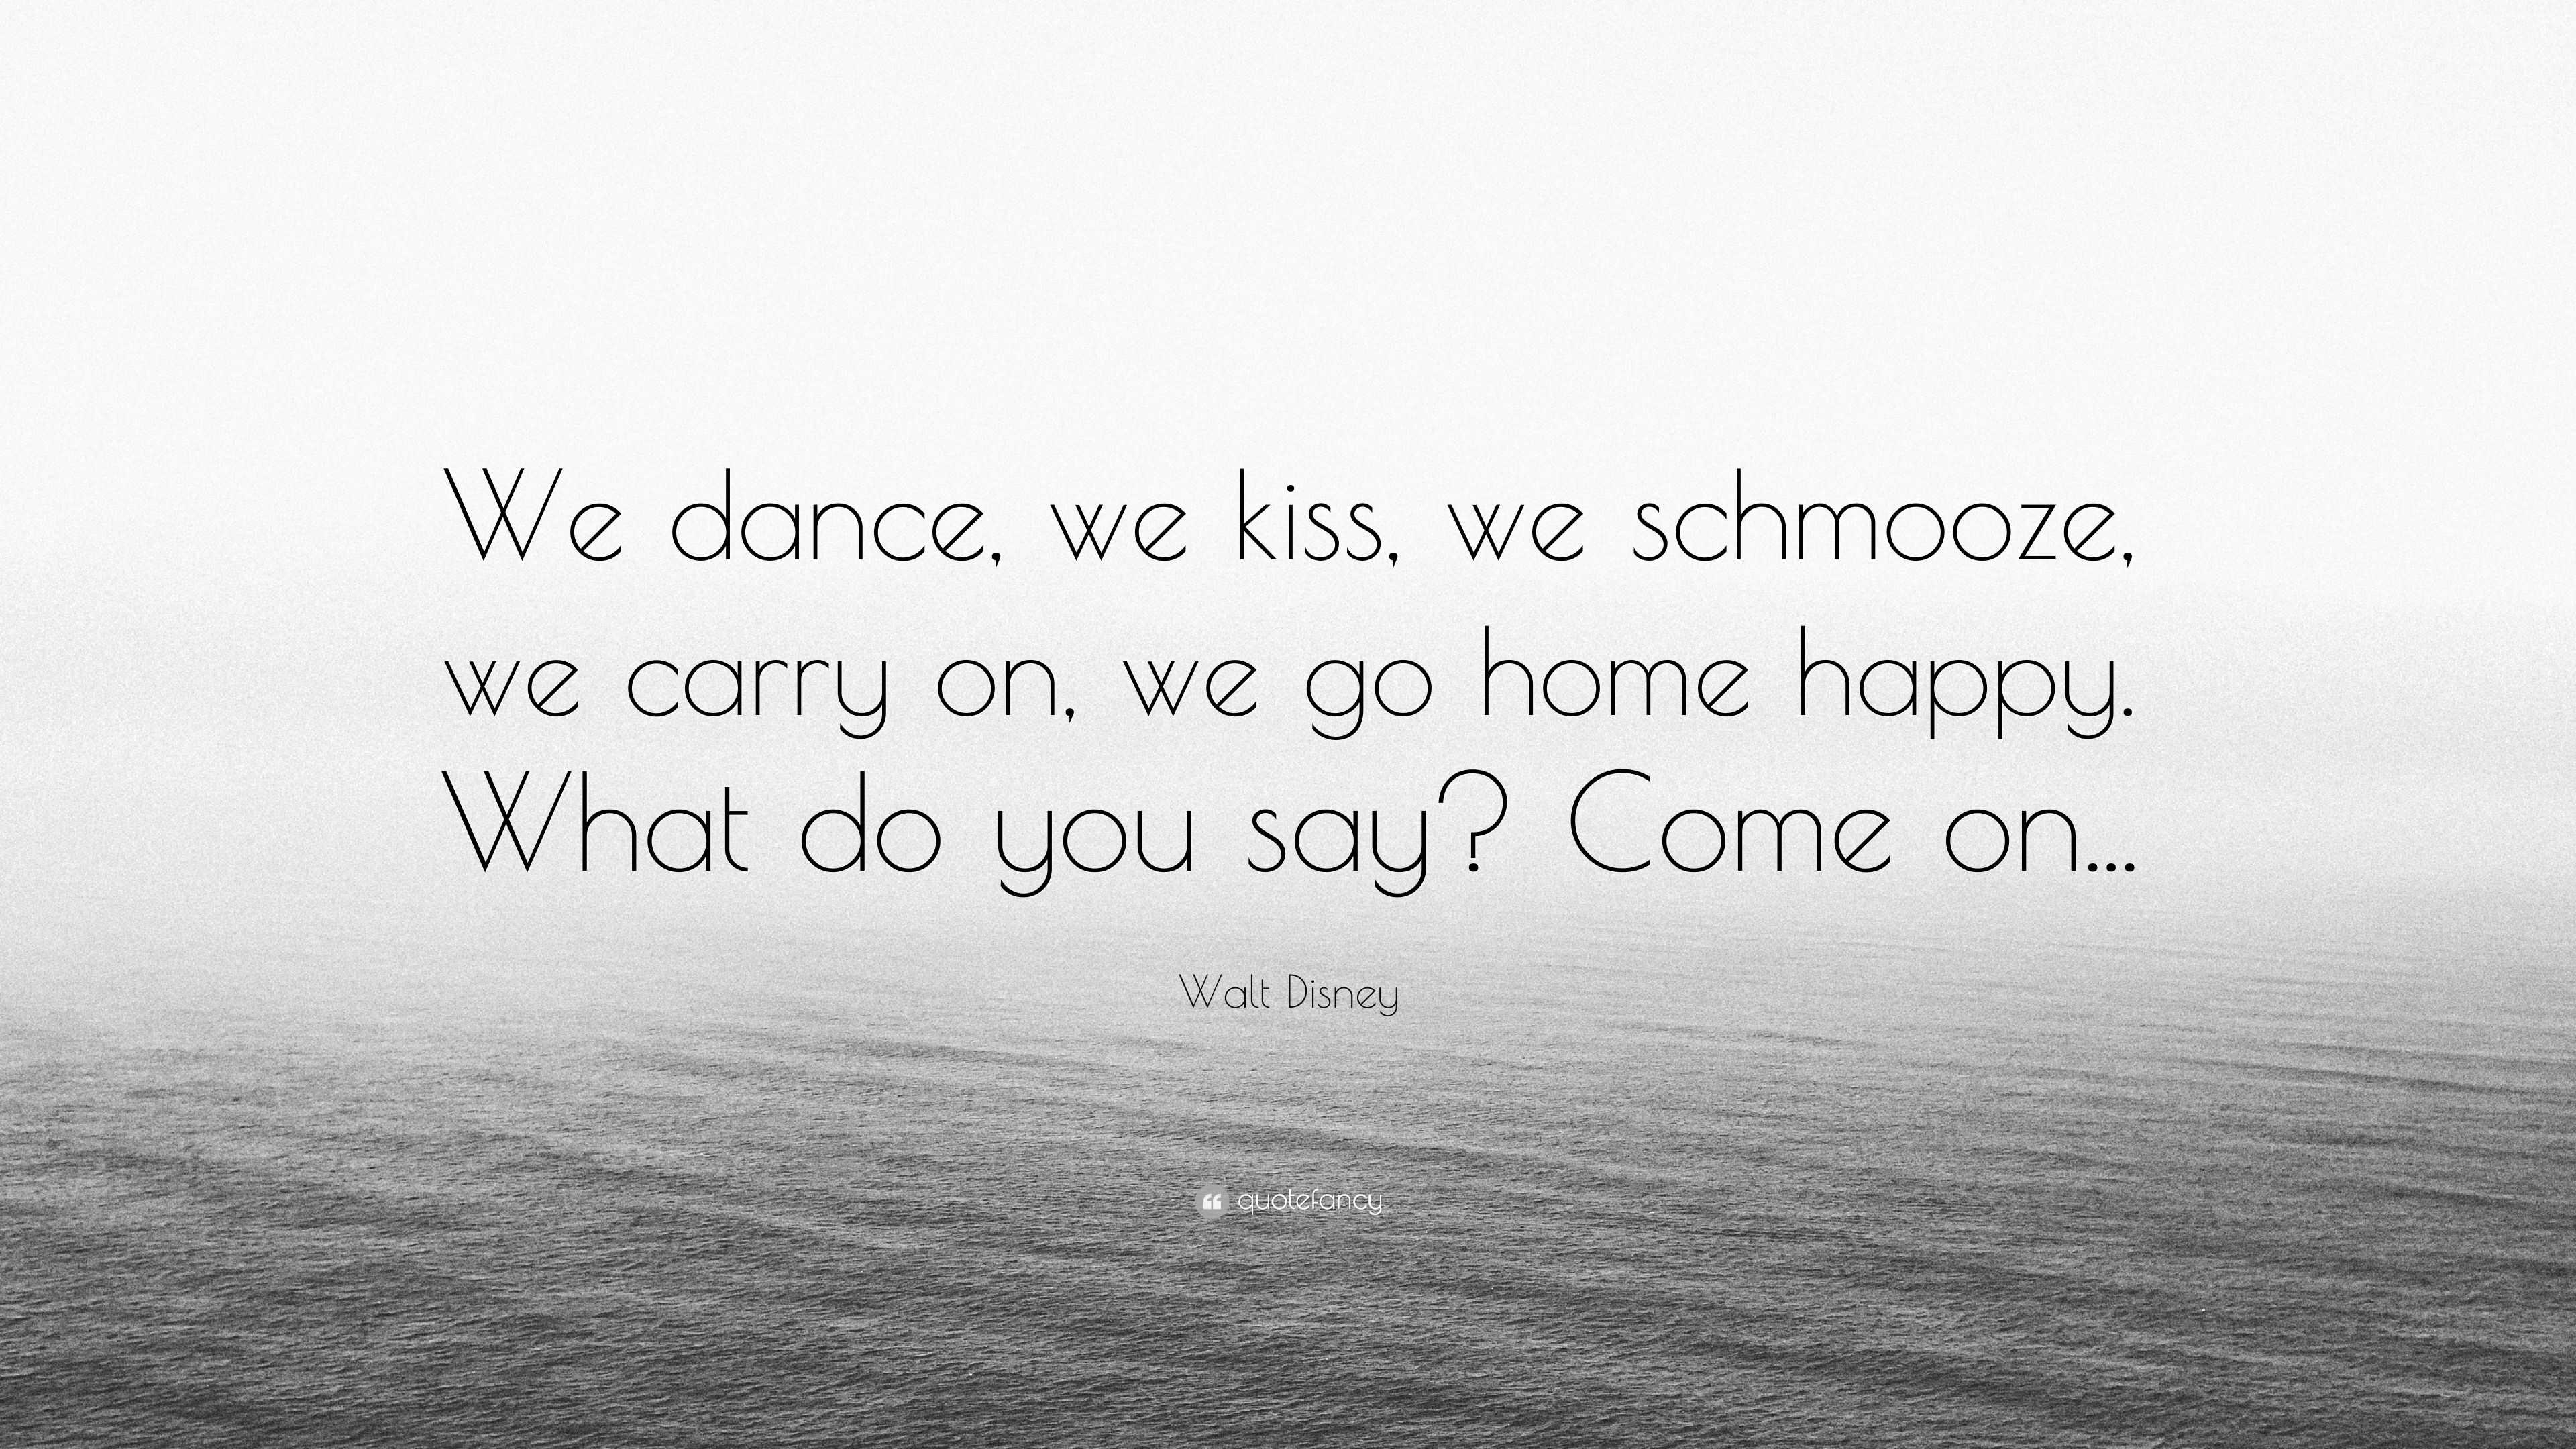 Walt Disney Quote We Dance We Kiss We Schmooze We Carry On We Go Home Happy What Do You Say Come On 7 Wallpapers Quotefancy